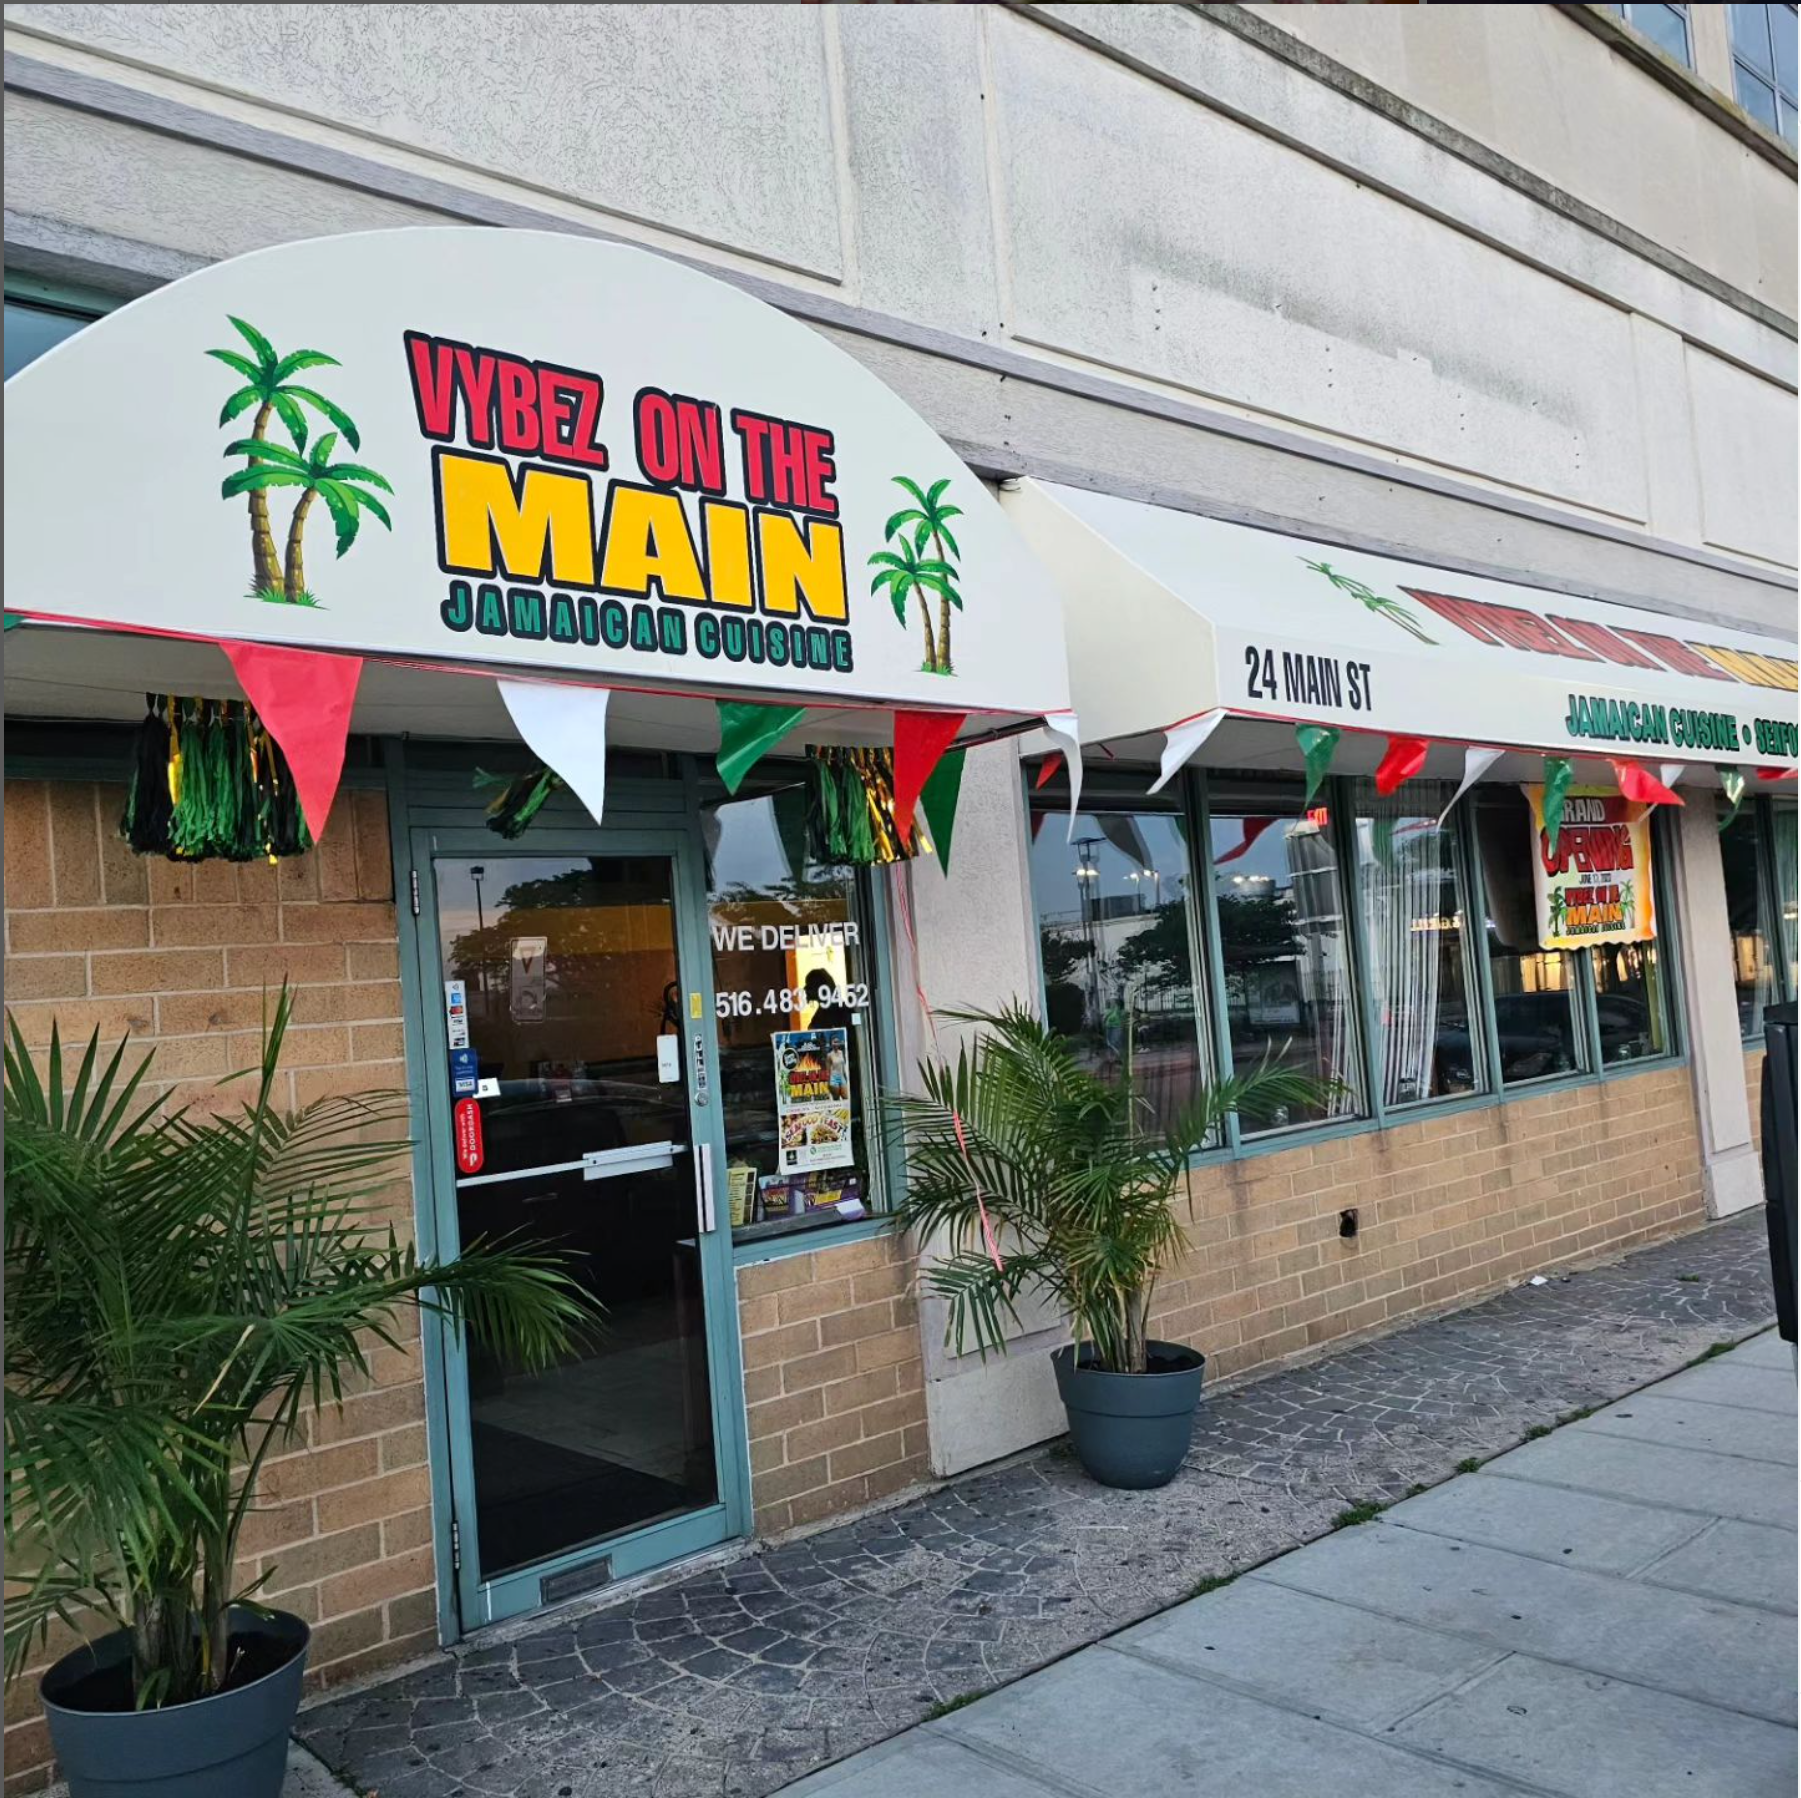 Photo of restaurant storefront with a white awning that displays red yellow and green Vybez On The Main logo